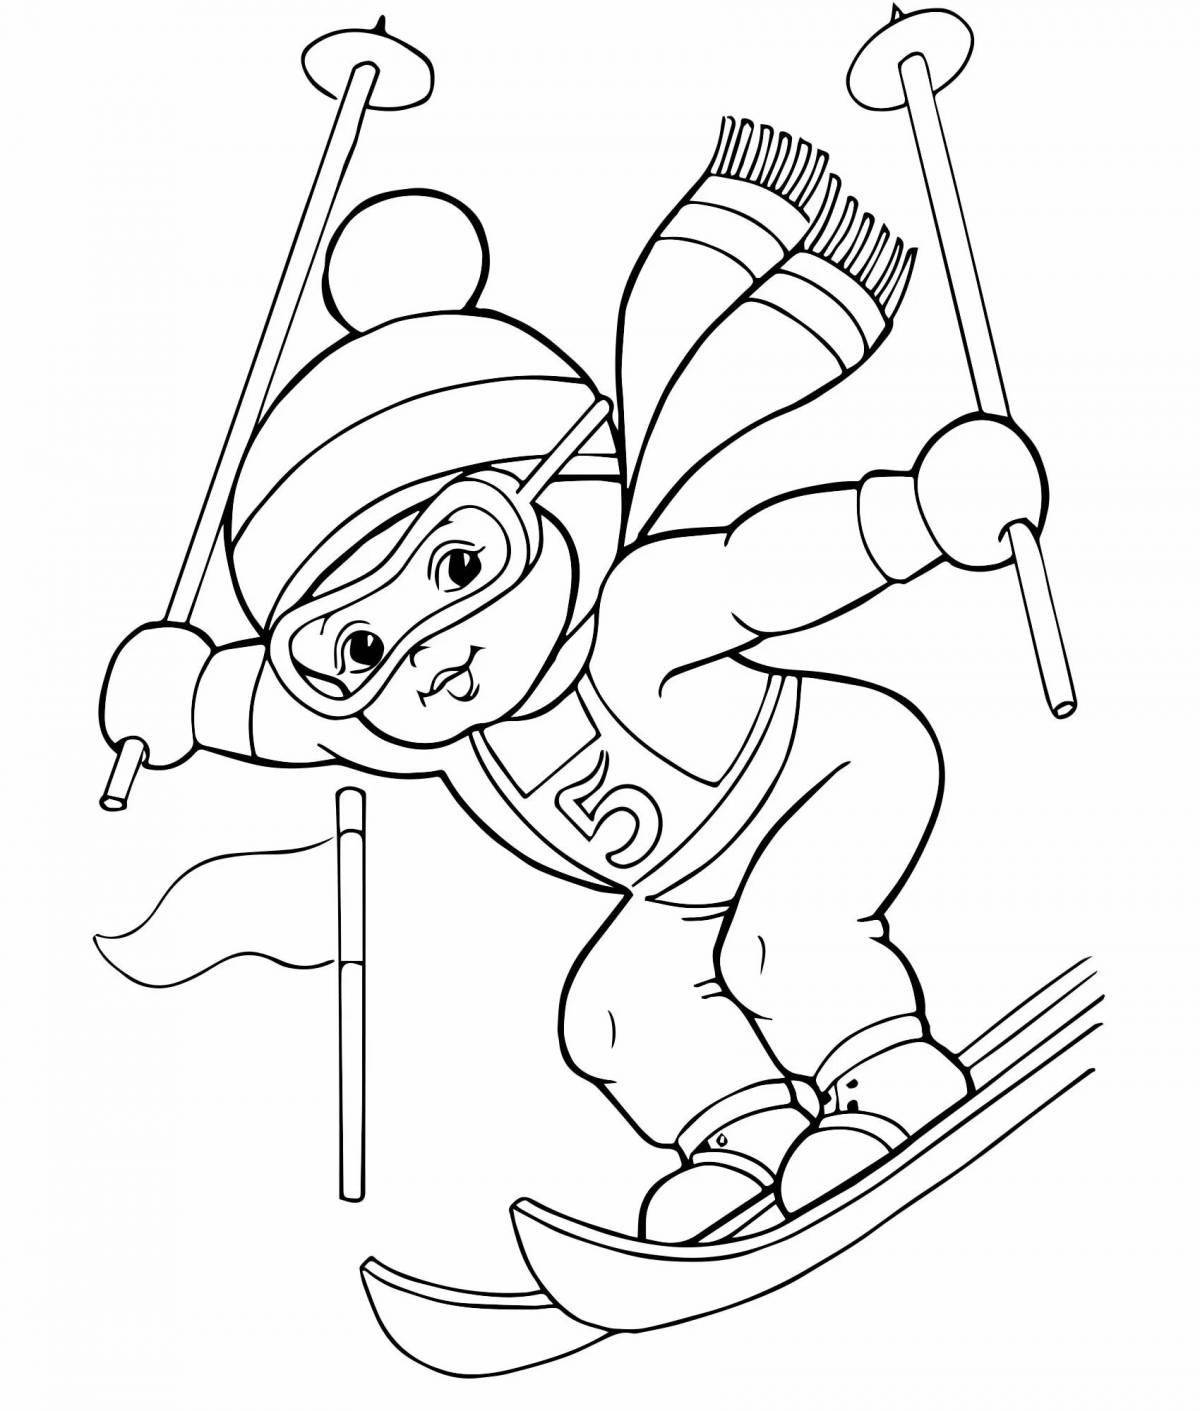 Adventure winter sports coloring page